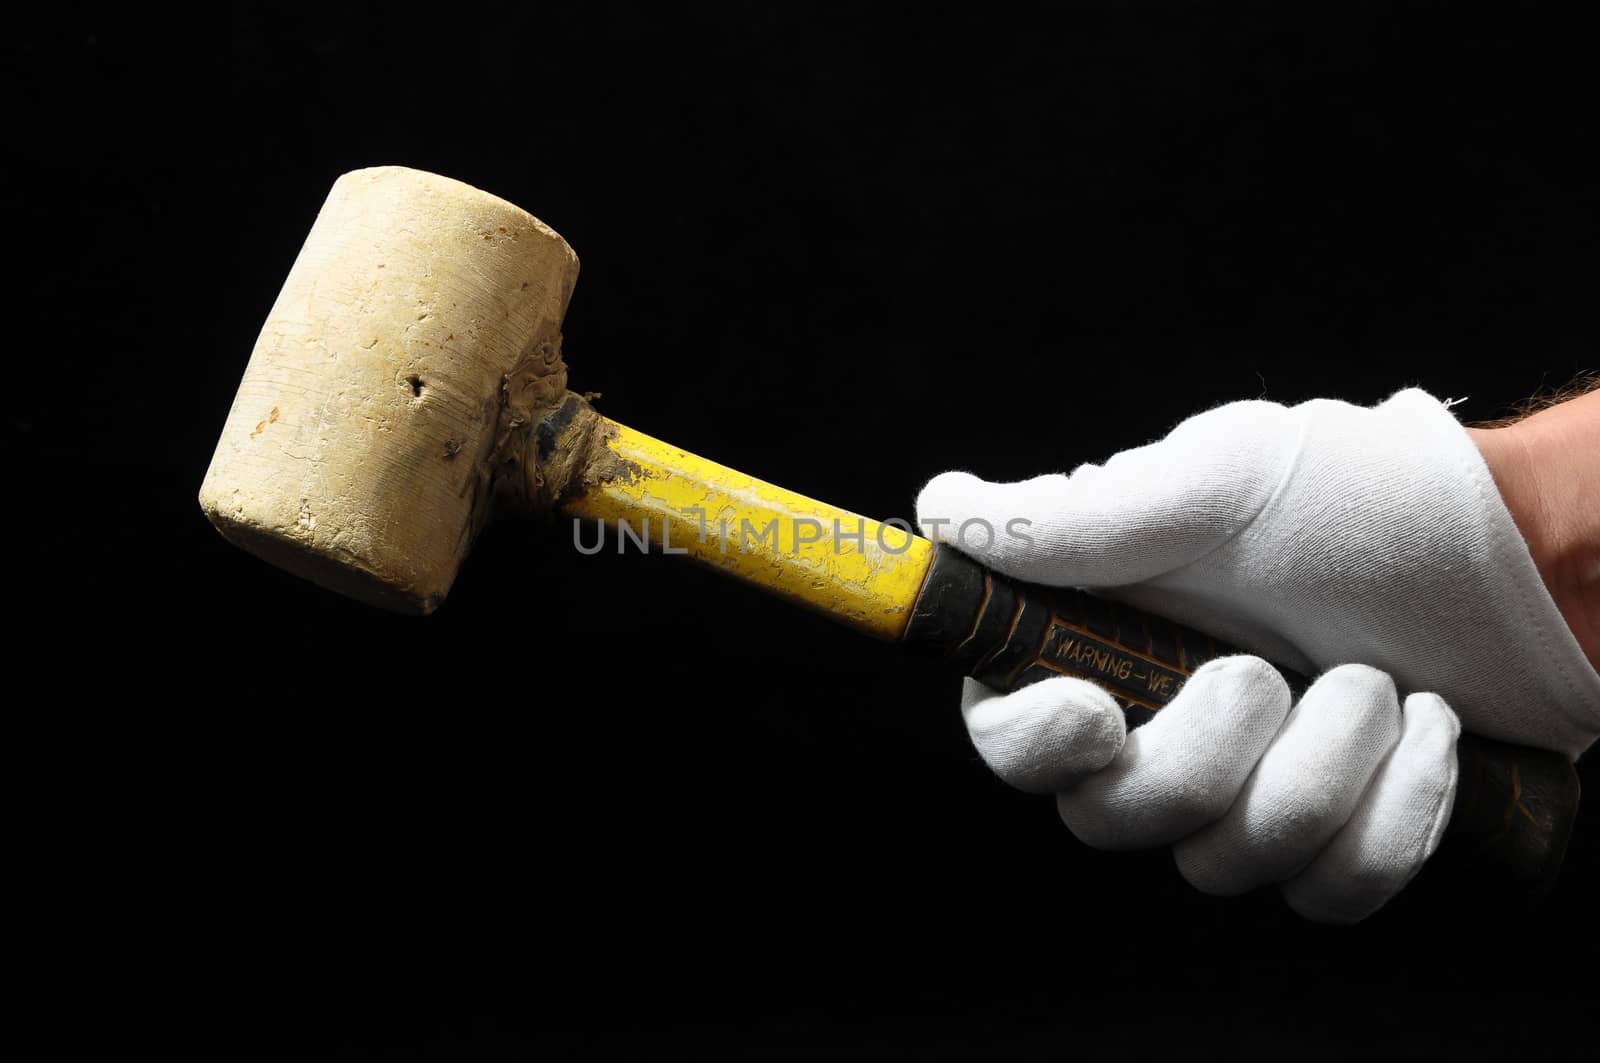 Hammer and a Hand on a Black Background